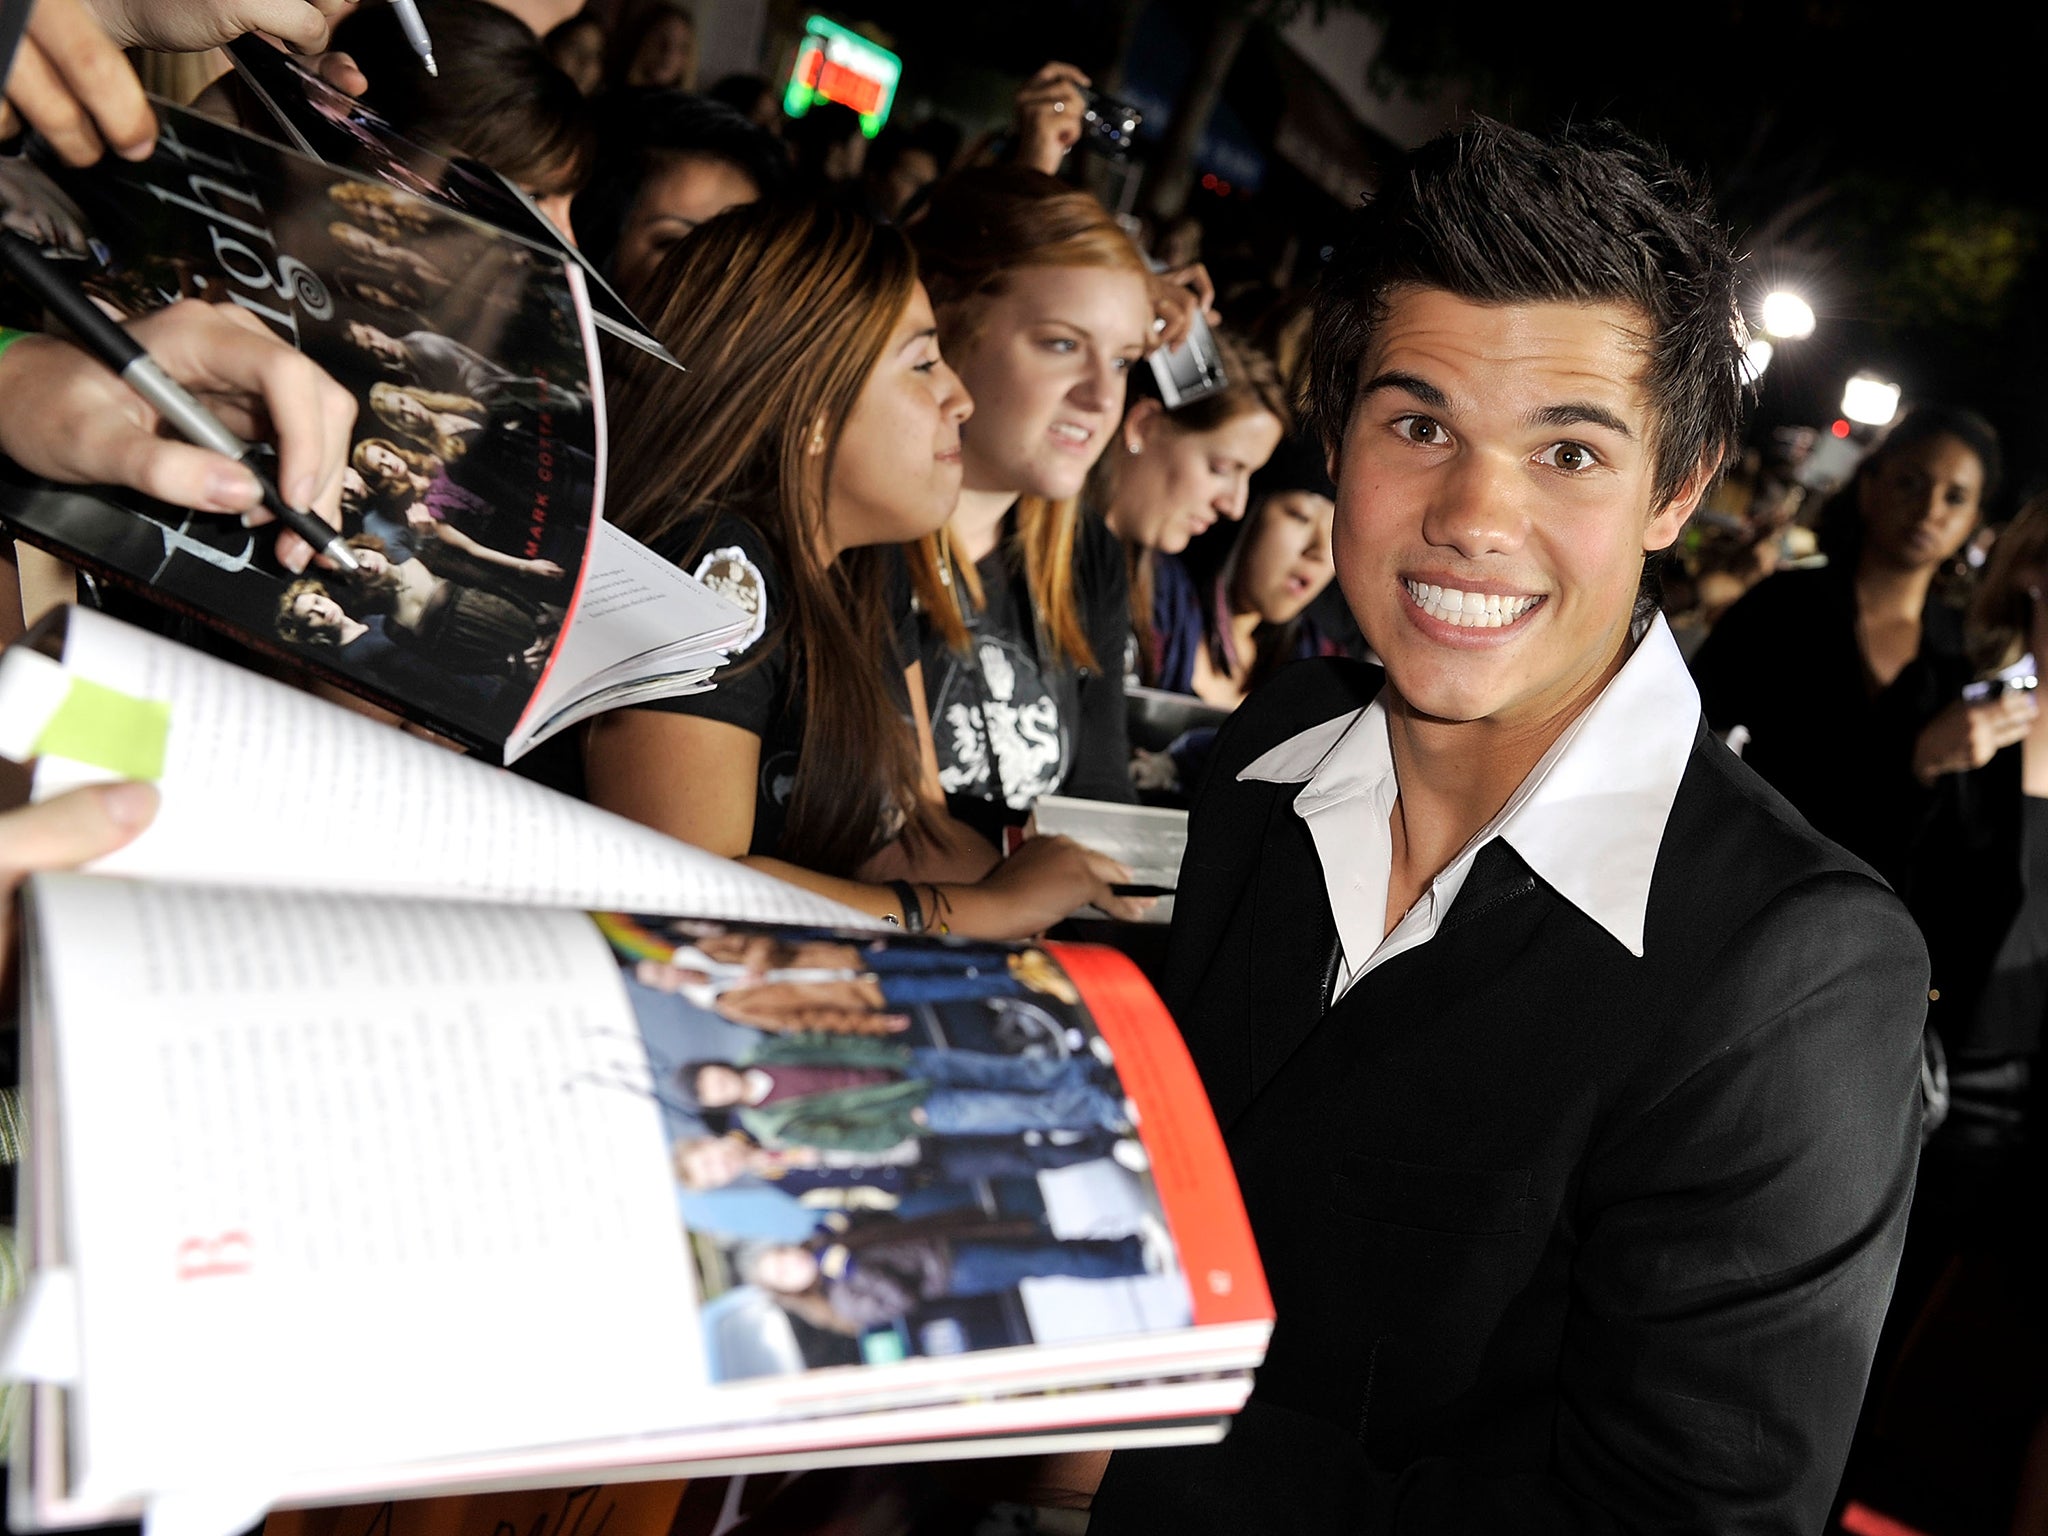 Taylor Lautner at the LA premiere of ‘Twilight’ in 2008